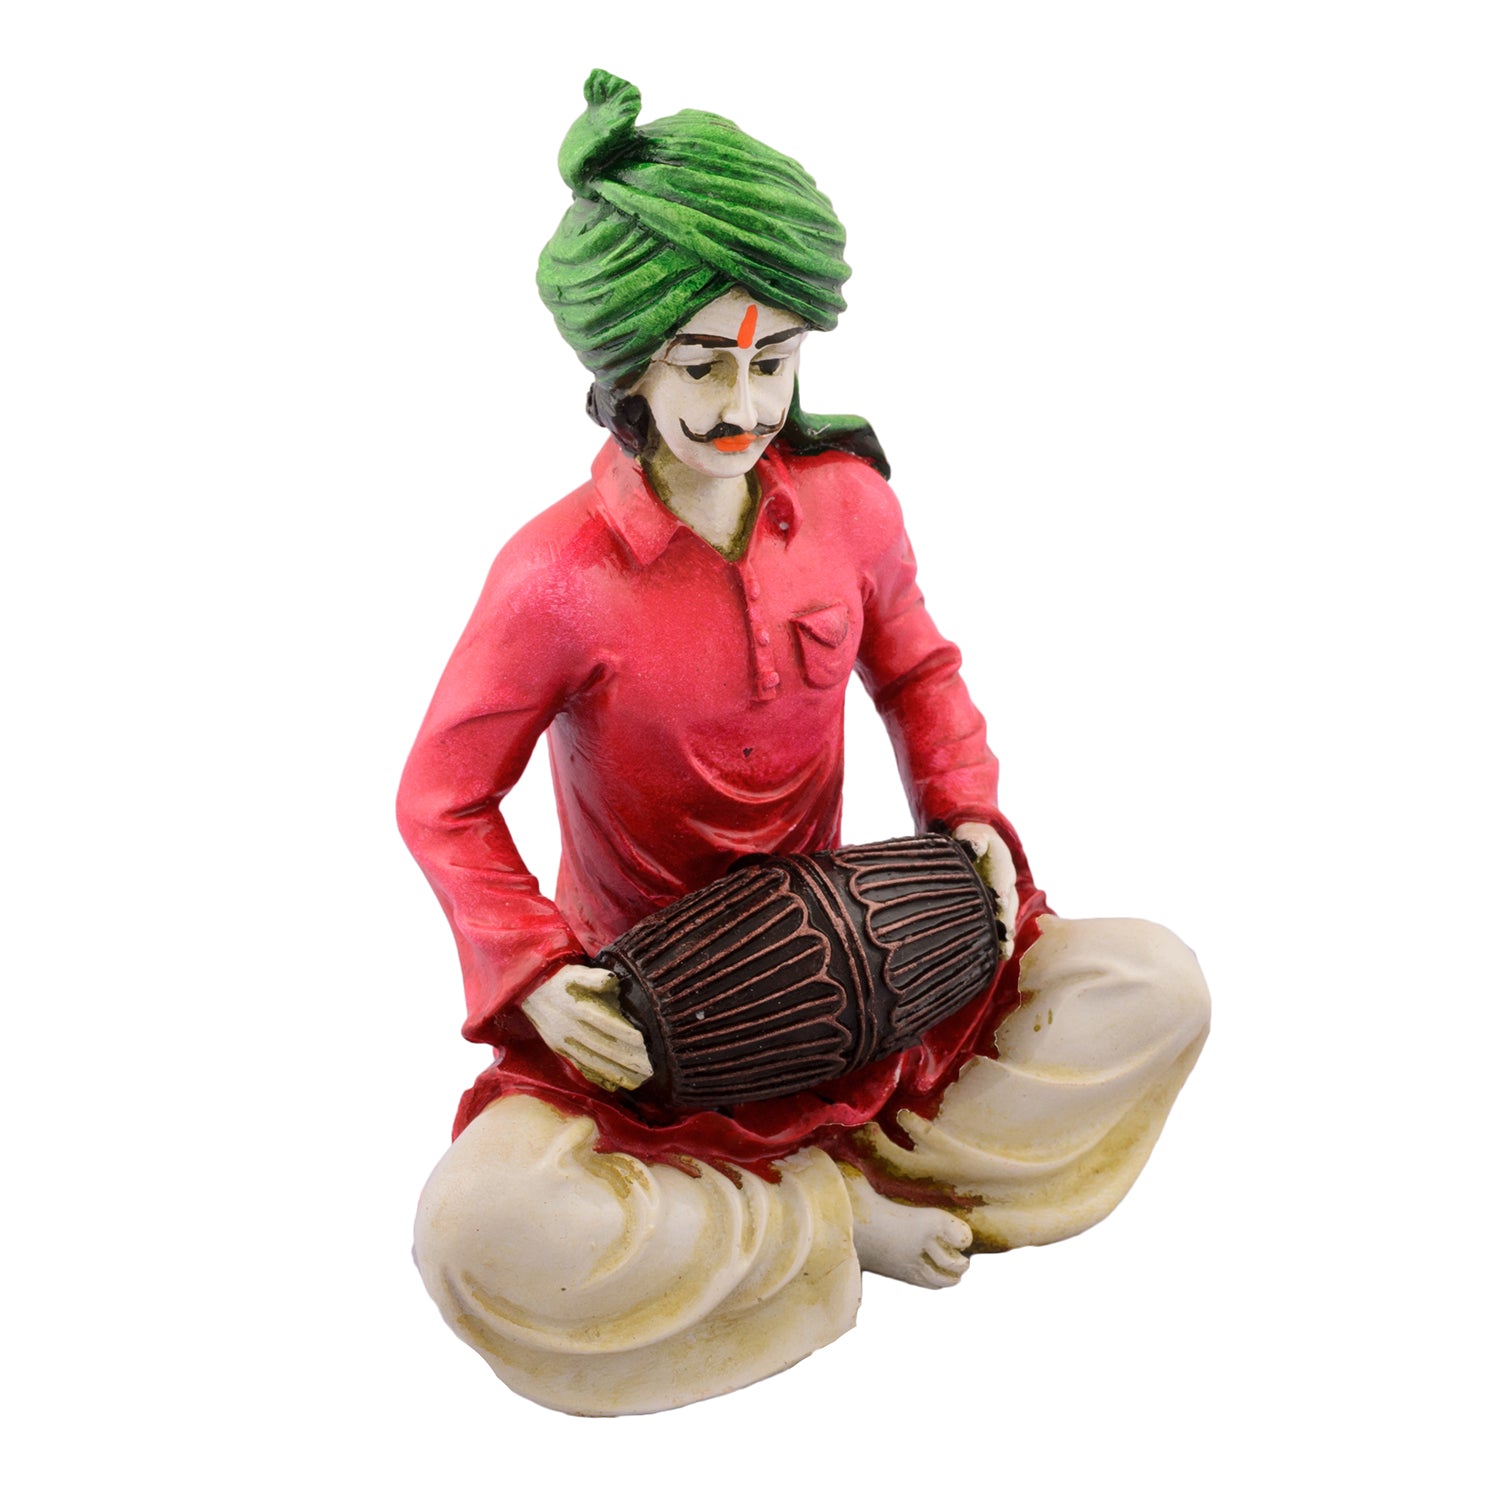 Polyresin Rajasthani Men Playing Dholak Handcrafted Decorative Showpiece (Pink and Green) 3